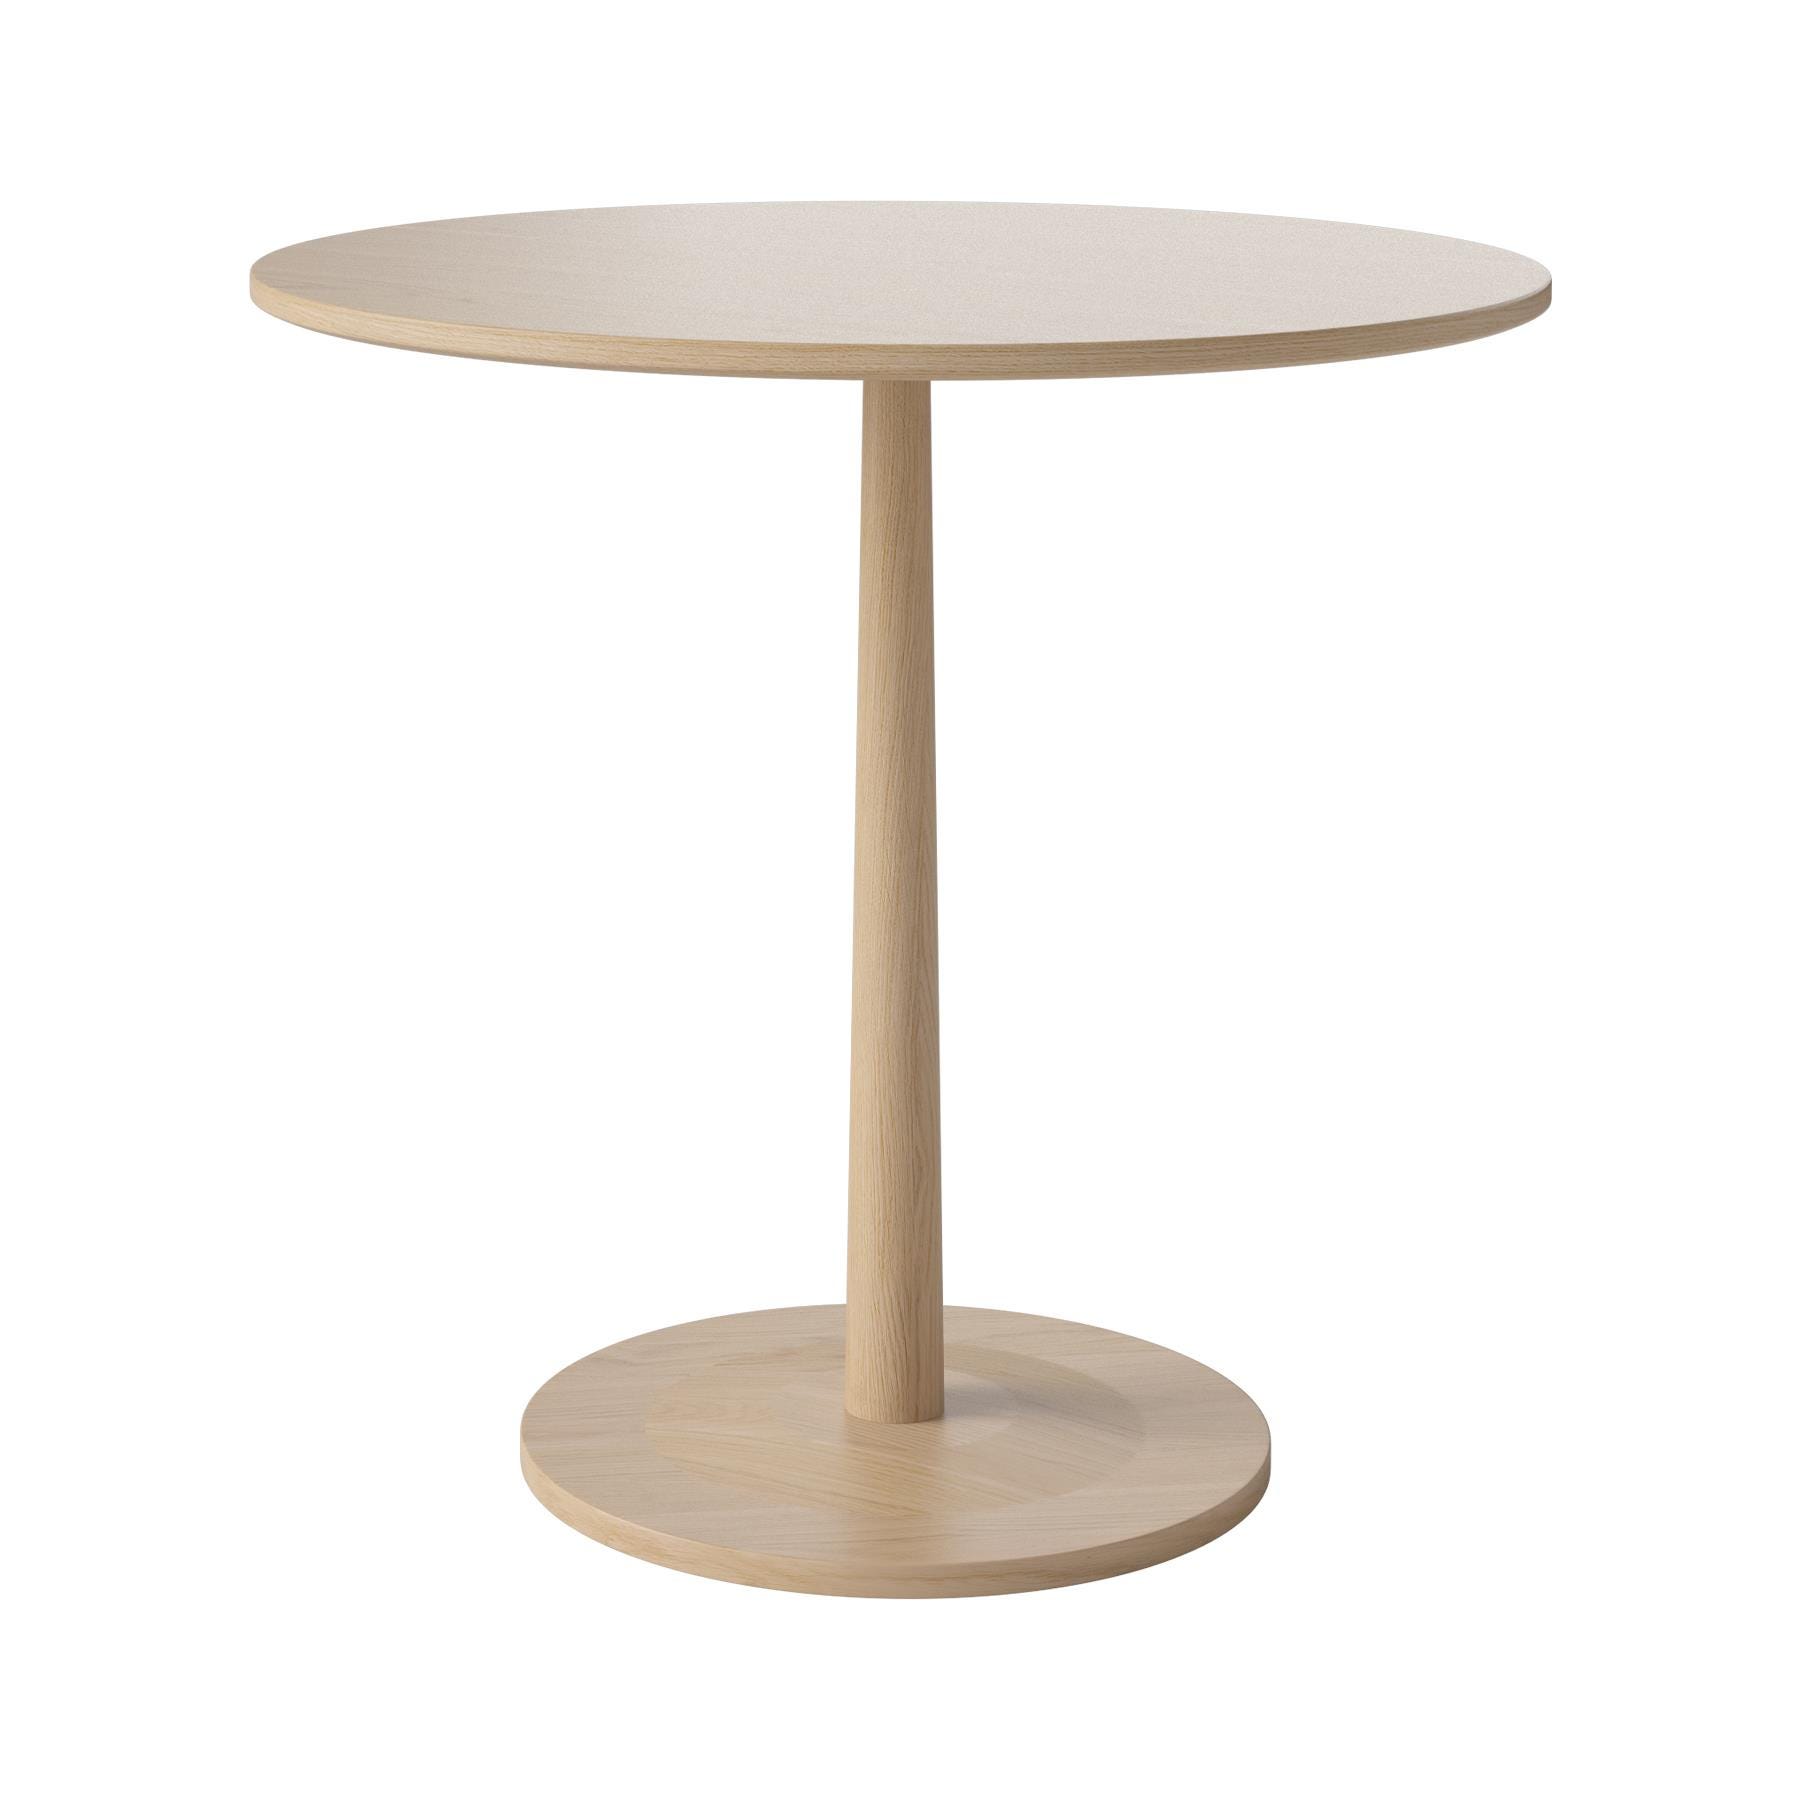 Bolia Turned Dining Table Round White Lacquered Oak Light Wood Designer Furniture From Holloways Of Ludlow